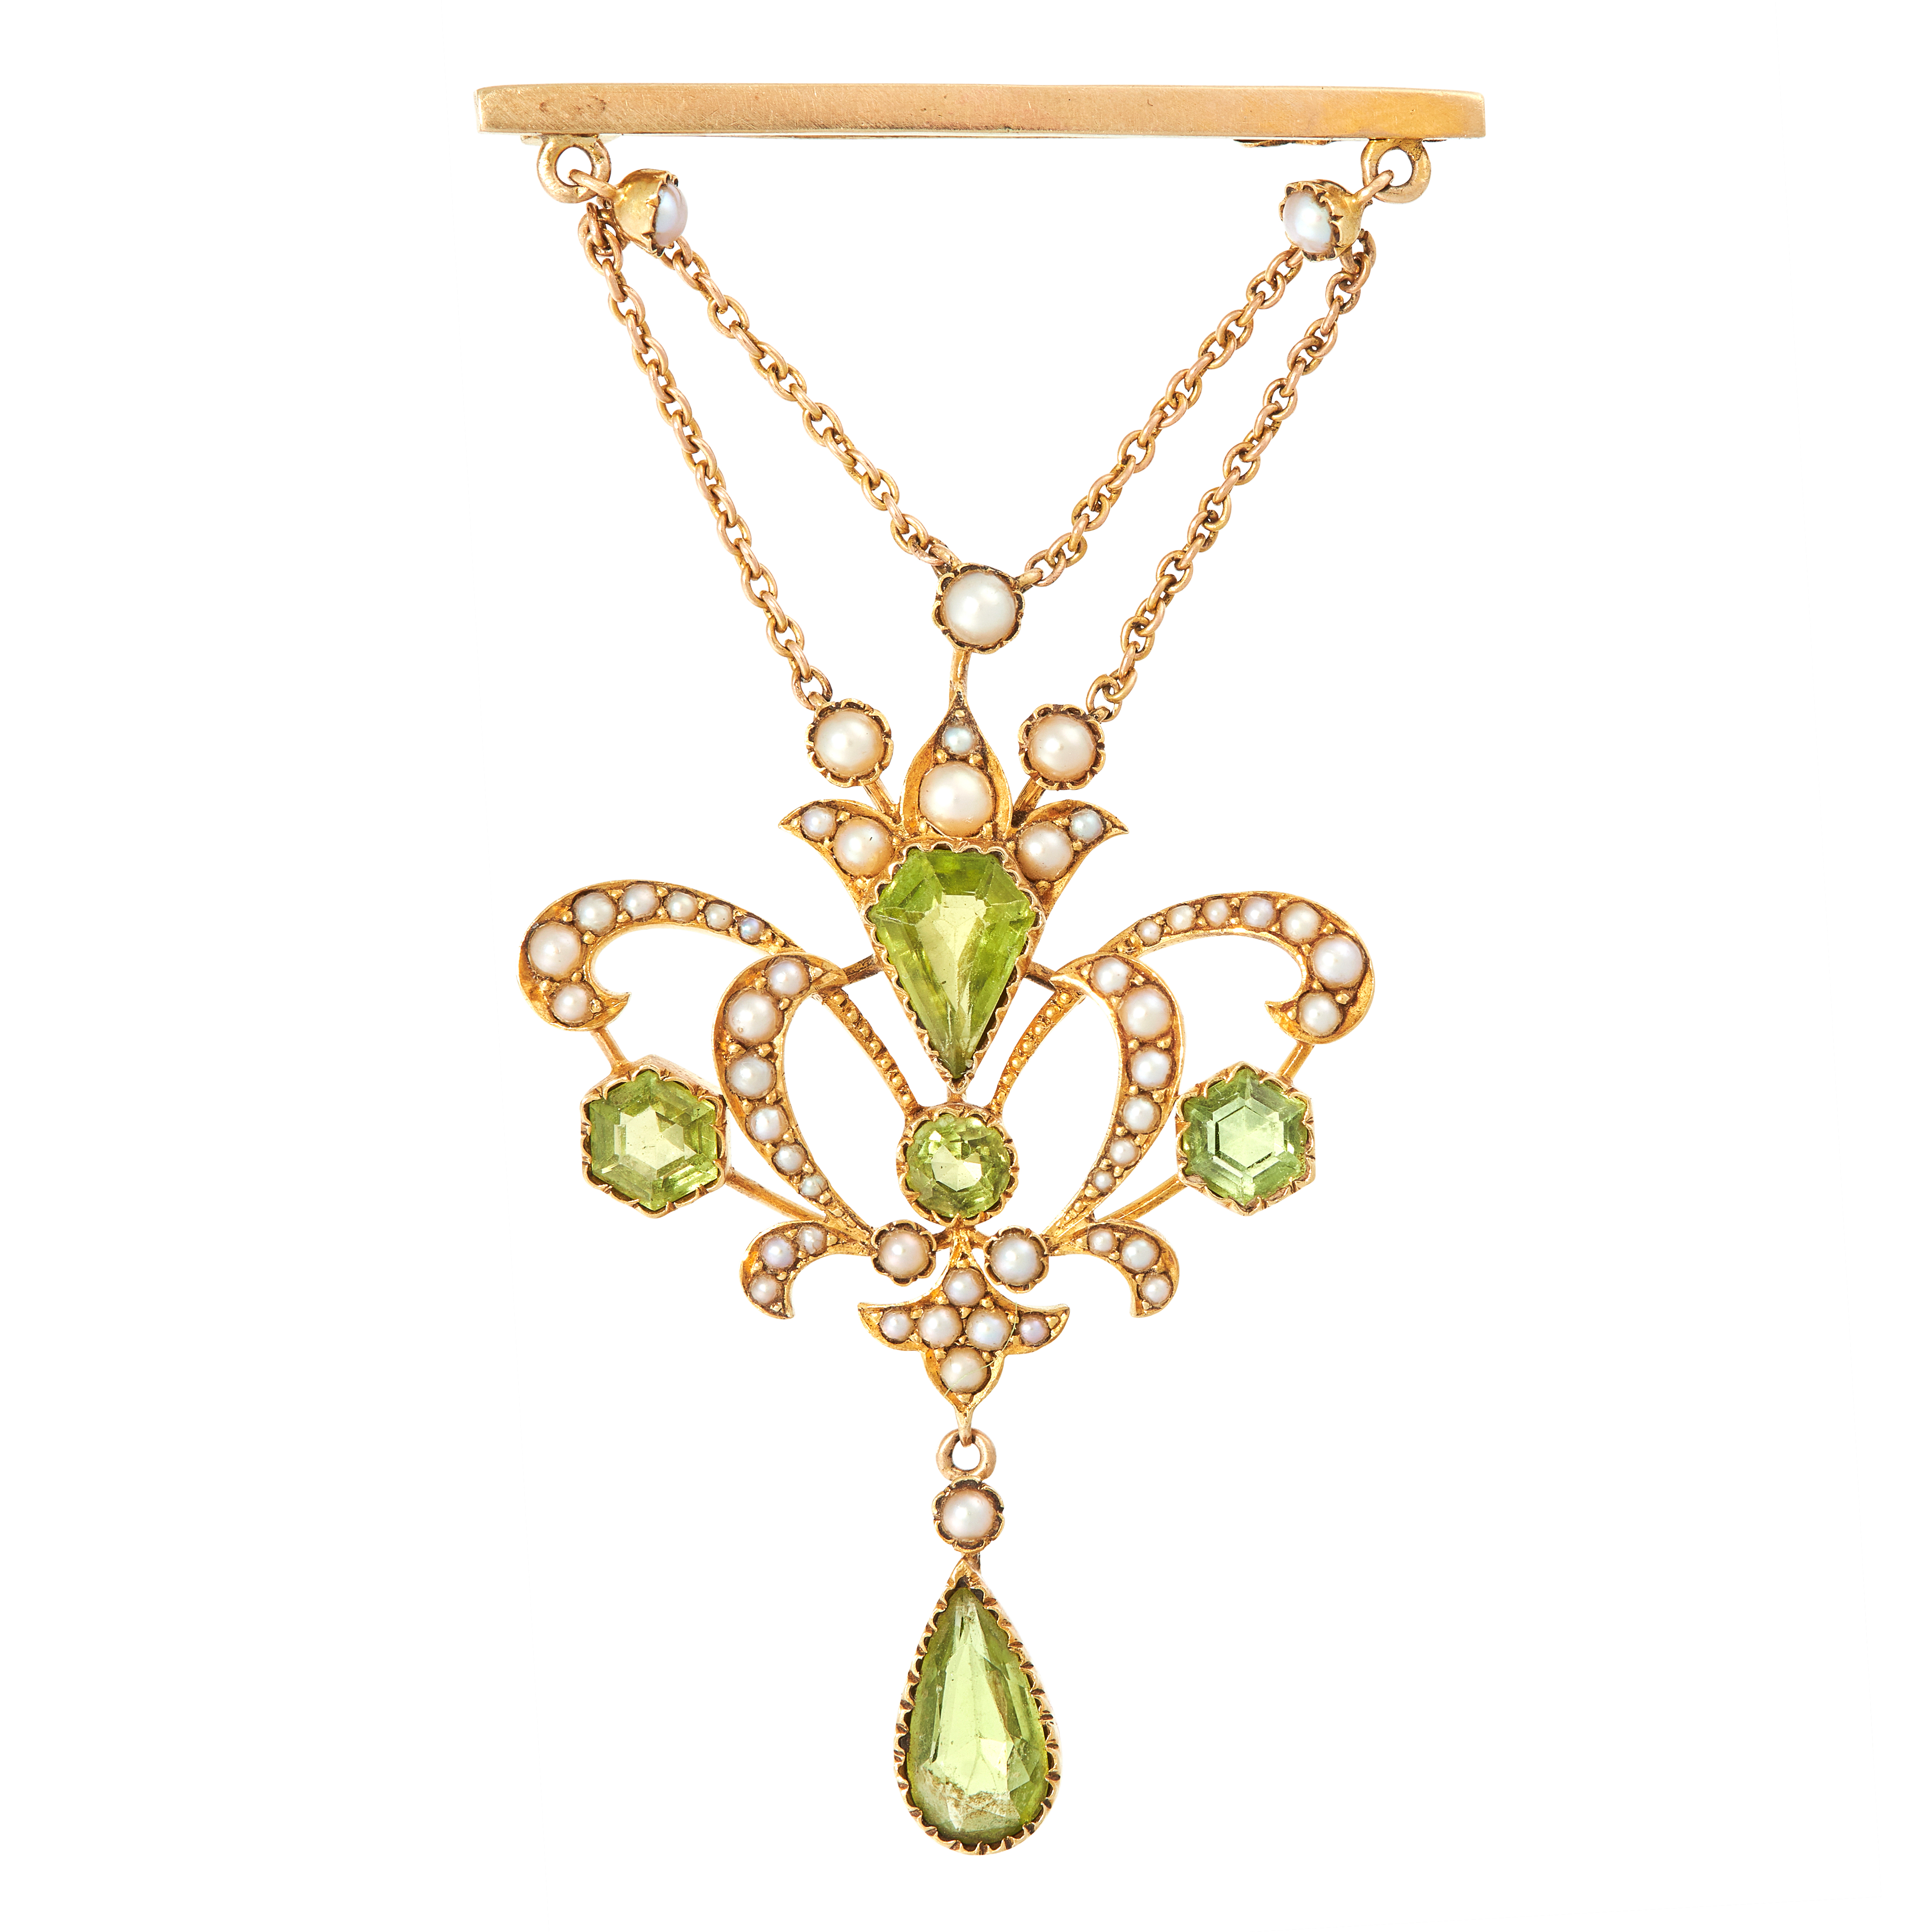 AN ANTIQUE PERIDOT AND PEARL BROOCH, EARLY 20TH CENTURY in yellow gold, formed of foliate